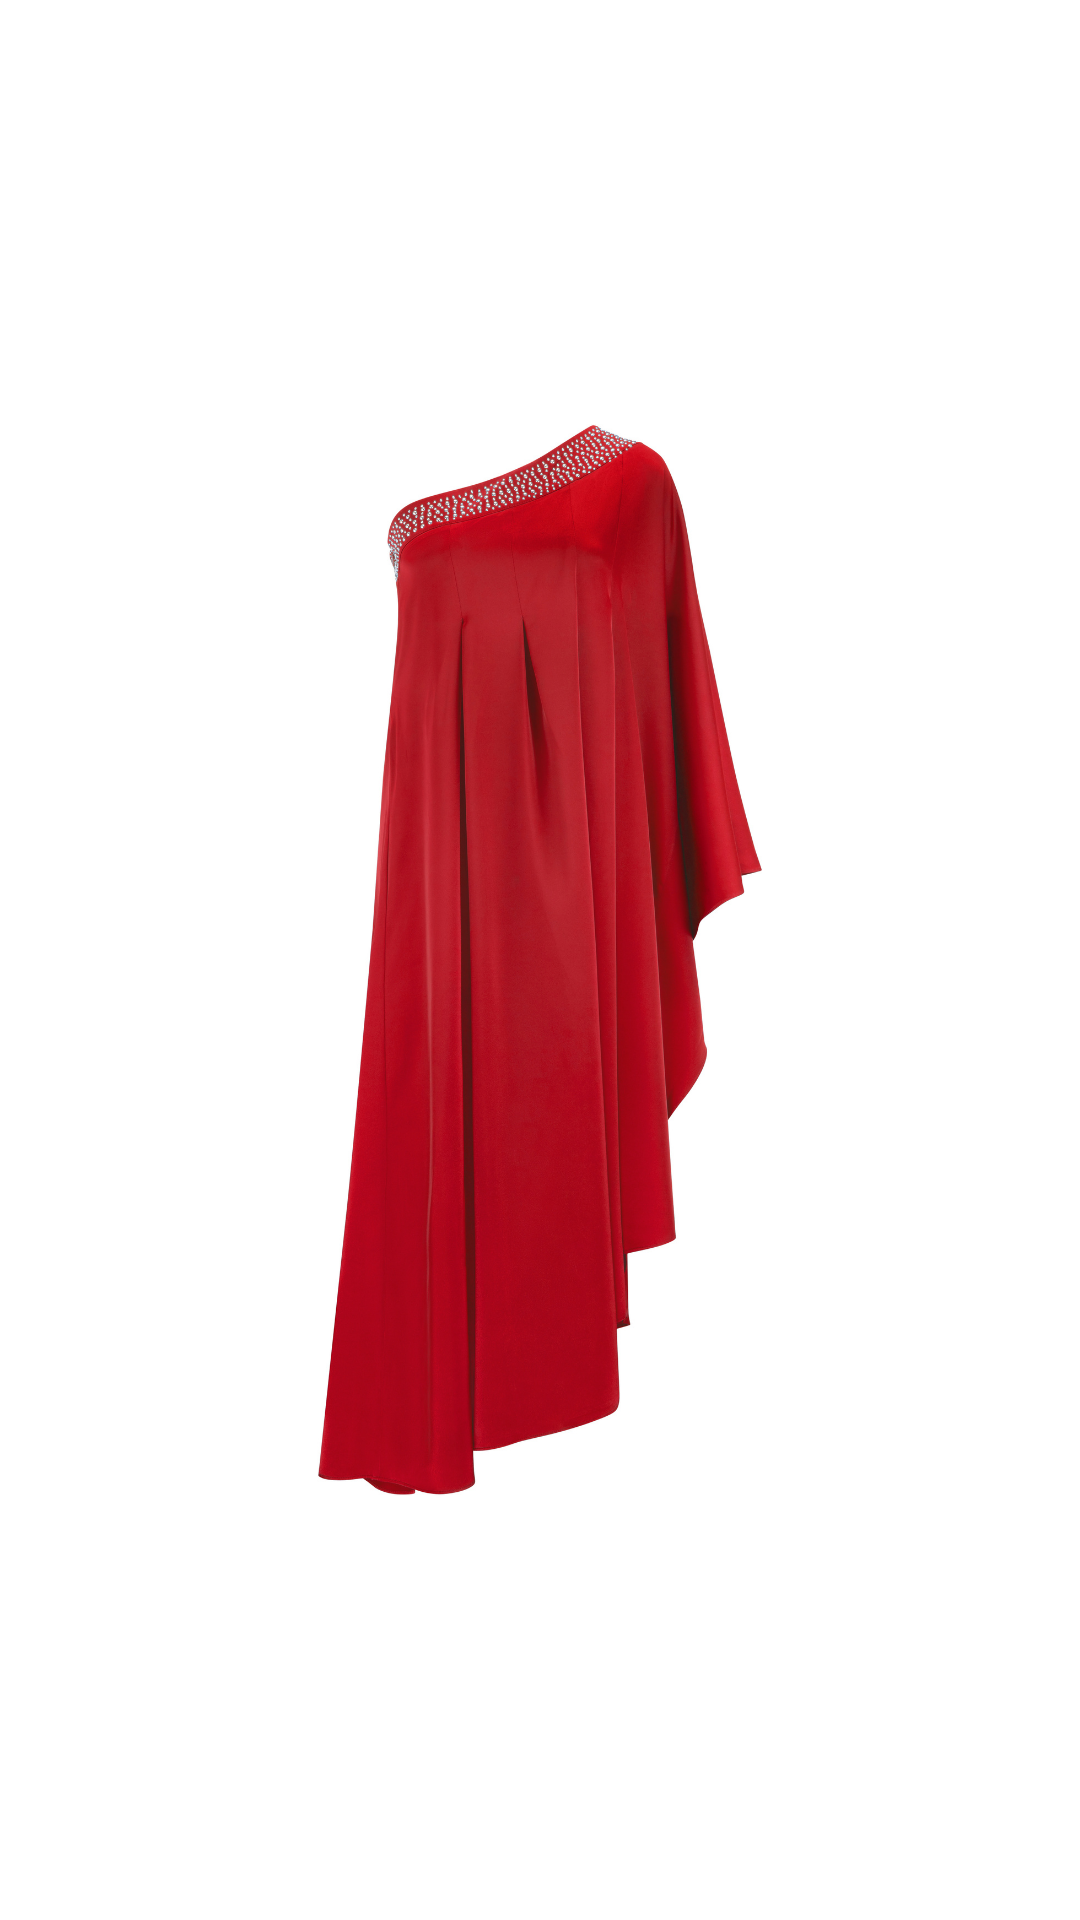 Luci Dress - Red